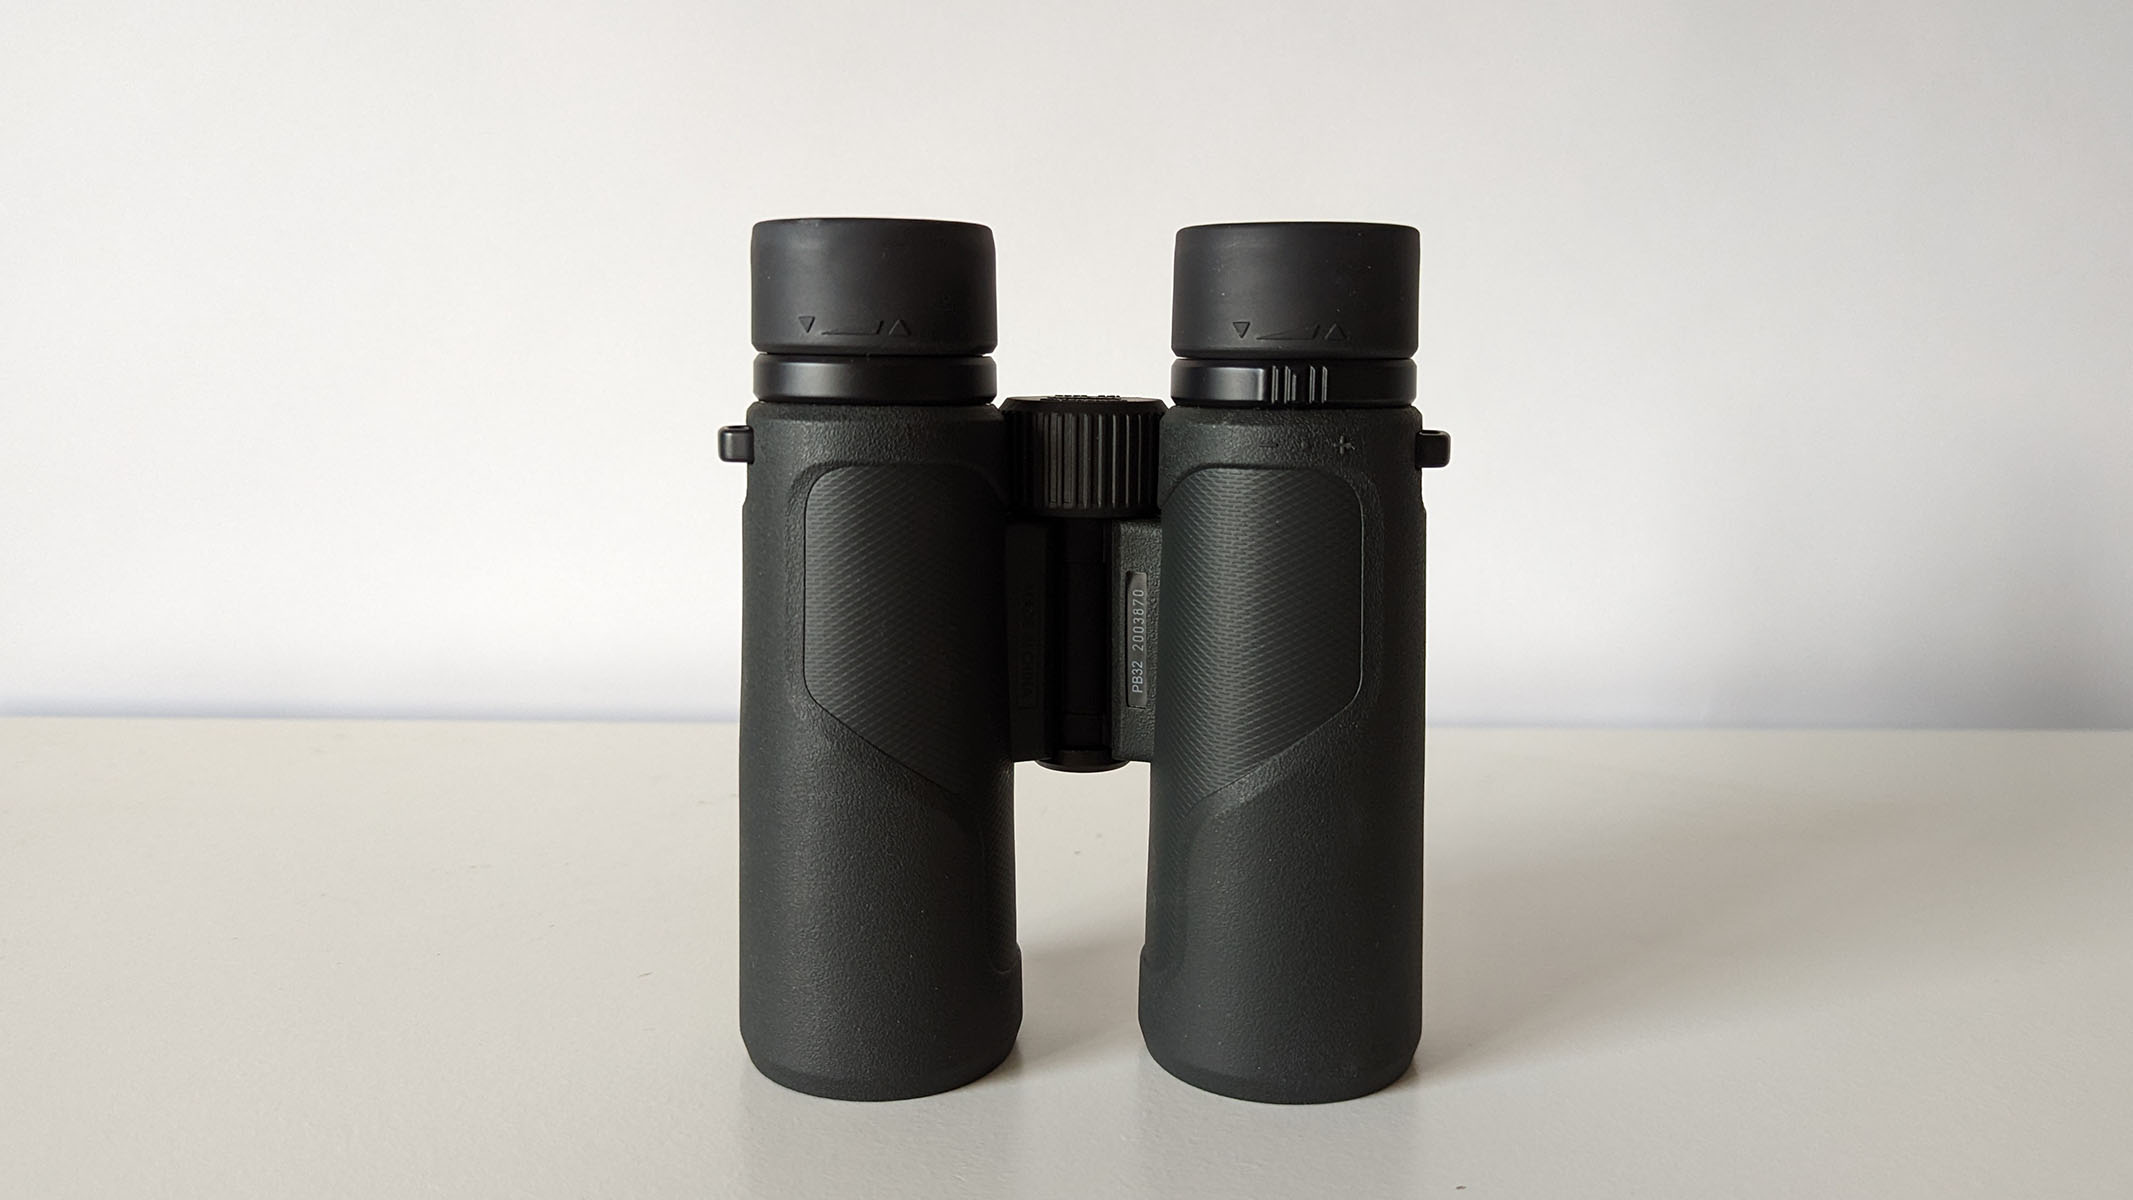 A wider view of the whole binocular